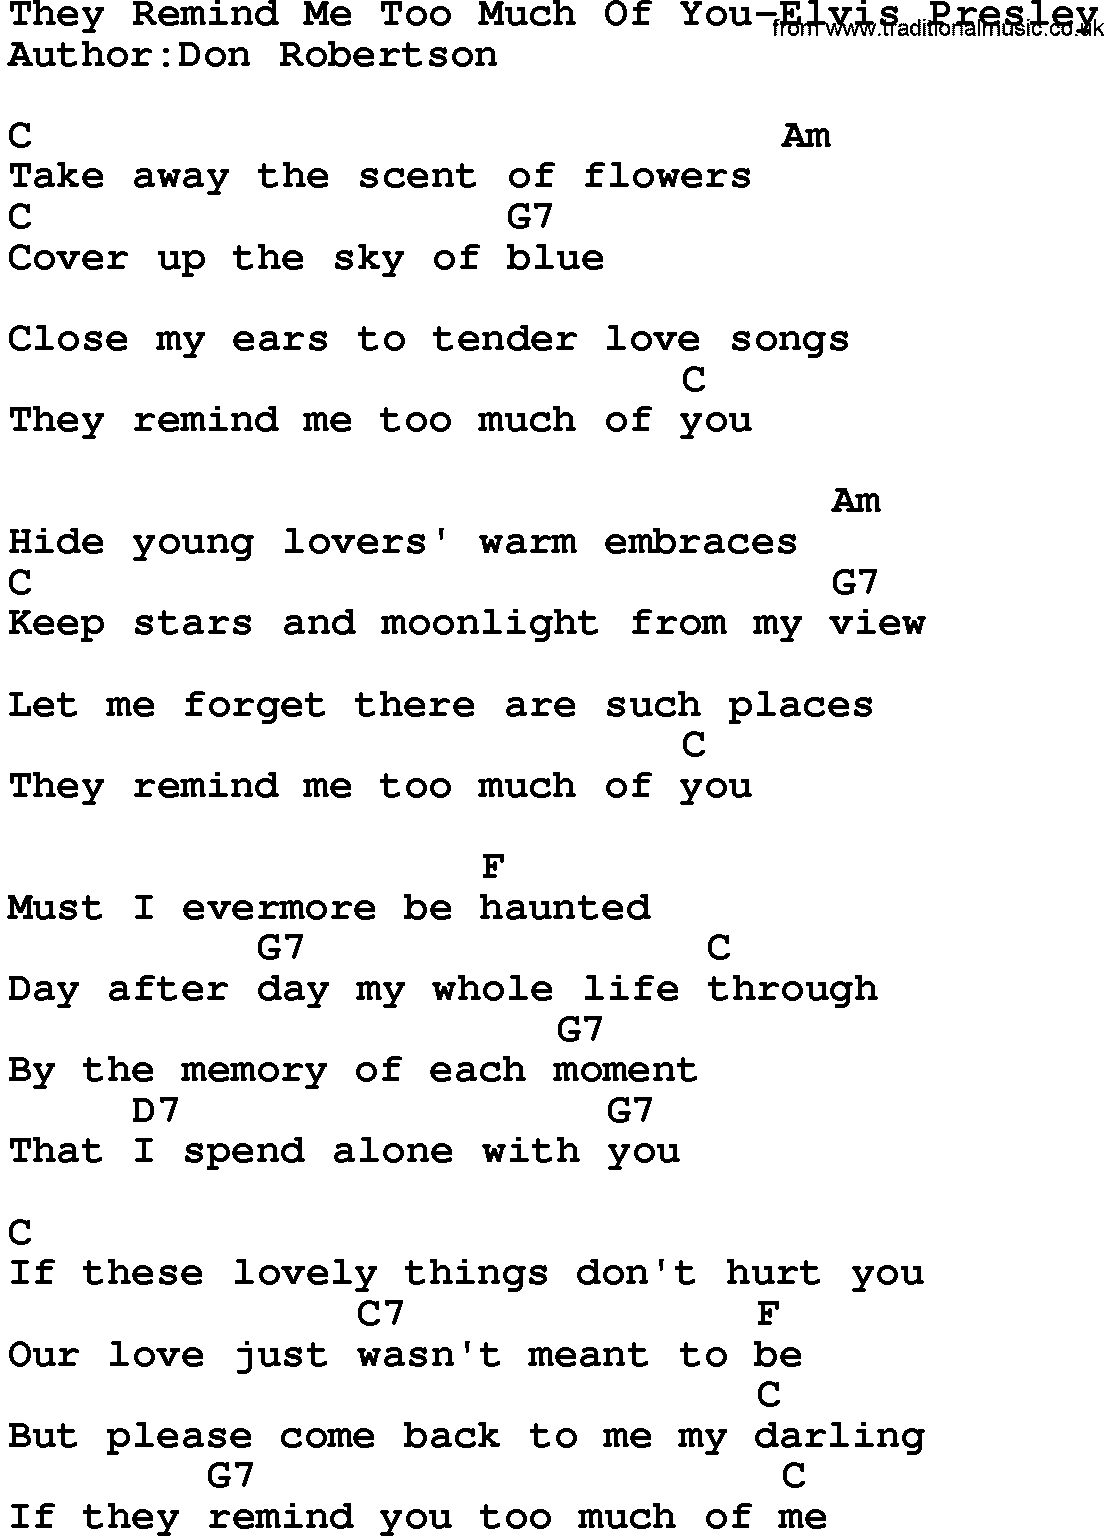 Country music song: They Remind Me Too Much Of You-Elvis Presley lyrics and chords